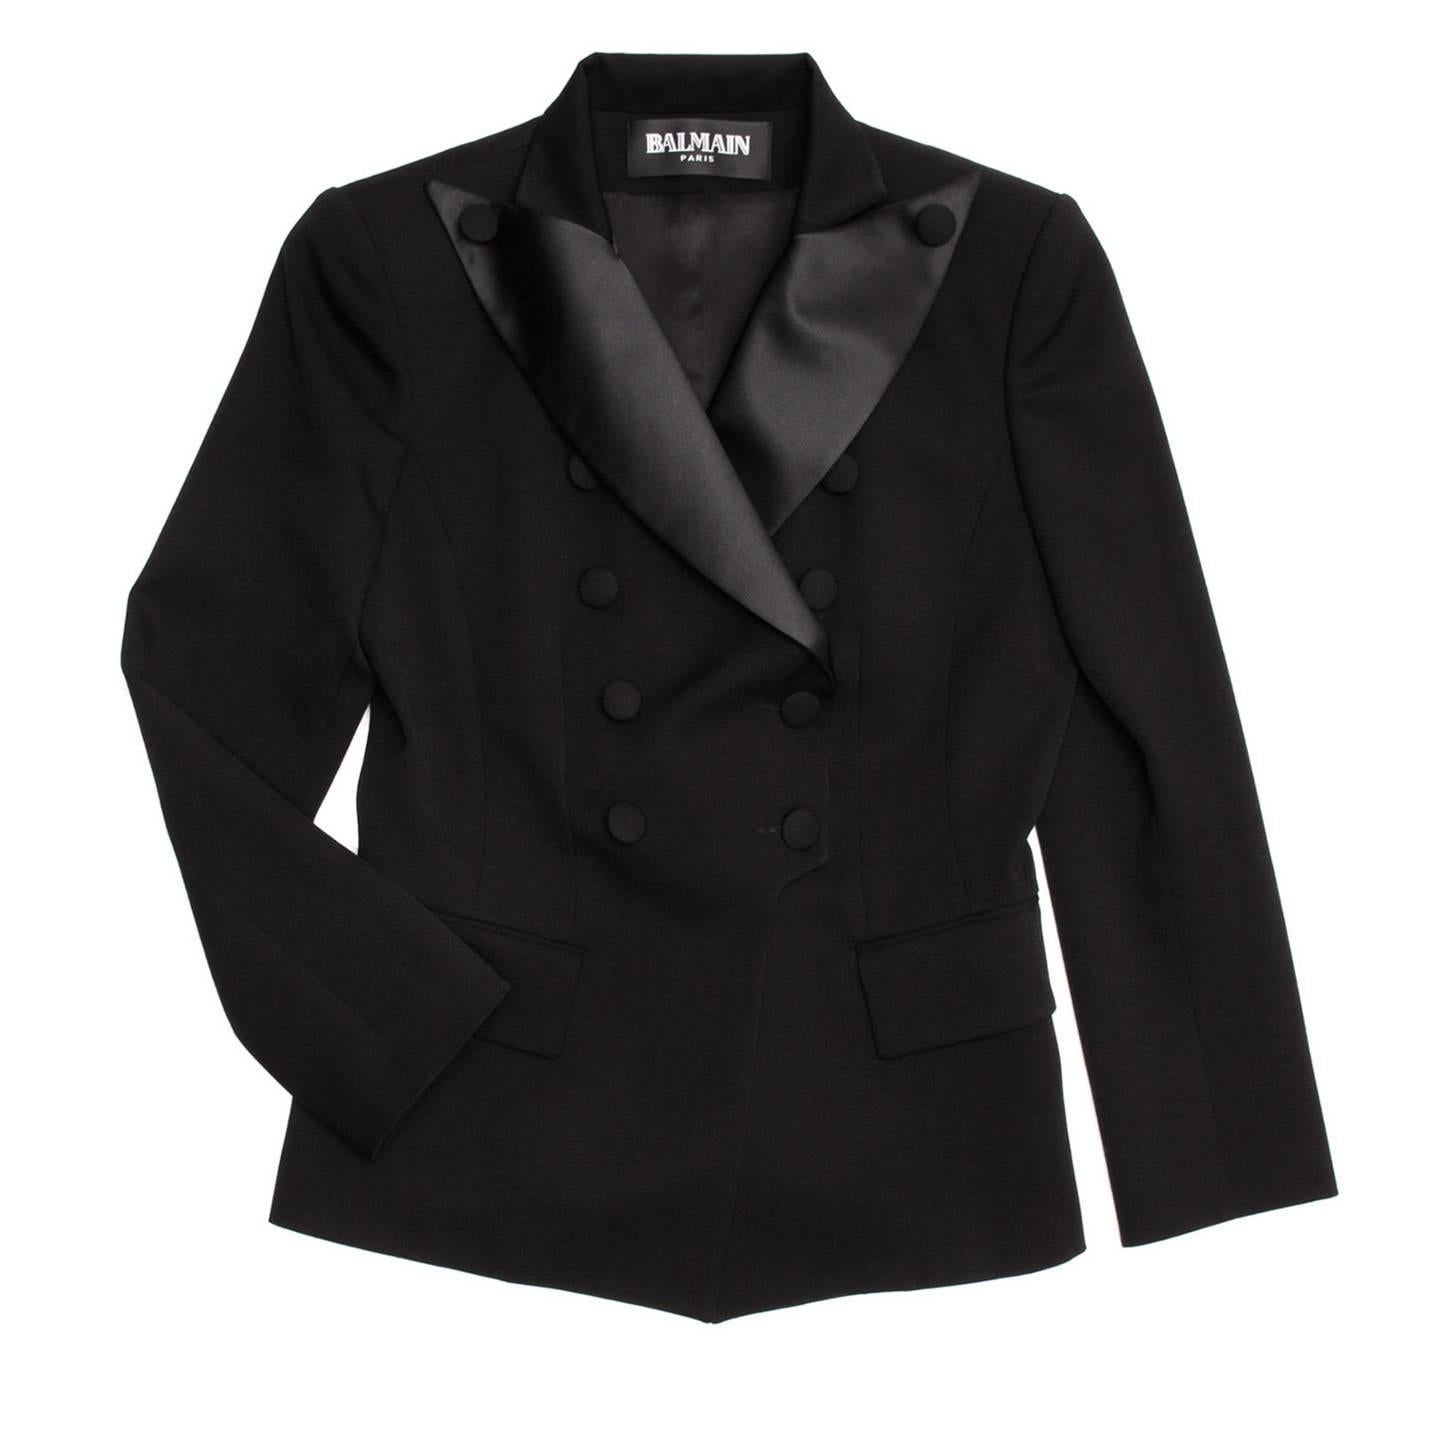 Black wool tuxedo style jacket tapered at waist for a feminine fit. Double breasted closure with wide satin lapels and wool covered buttons.

Size  44 French sizing

Condition  Excellent: worn a few times